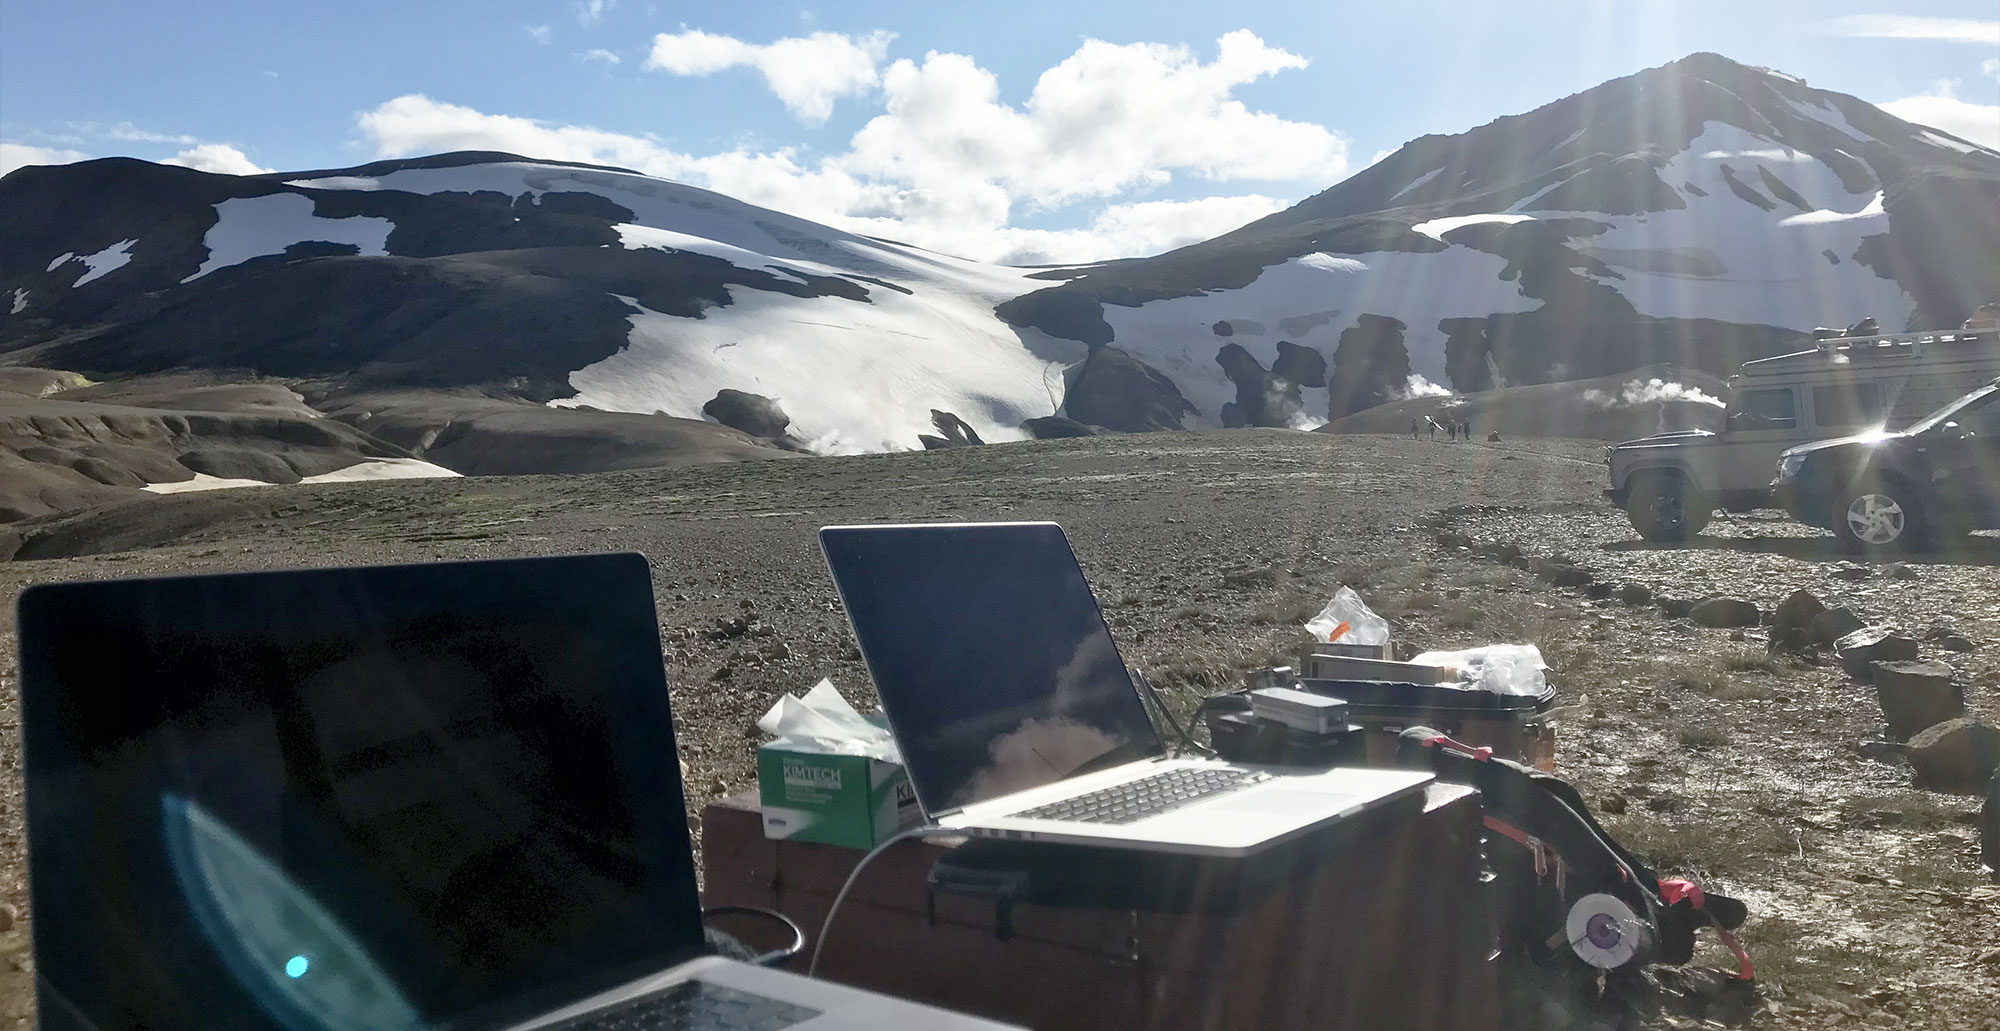 New nanopore sequencing Field Kit in use in Iceland 